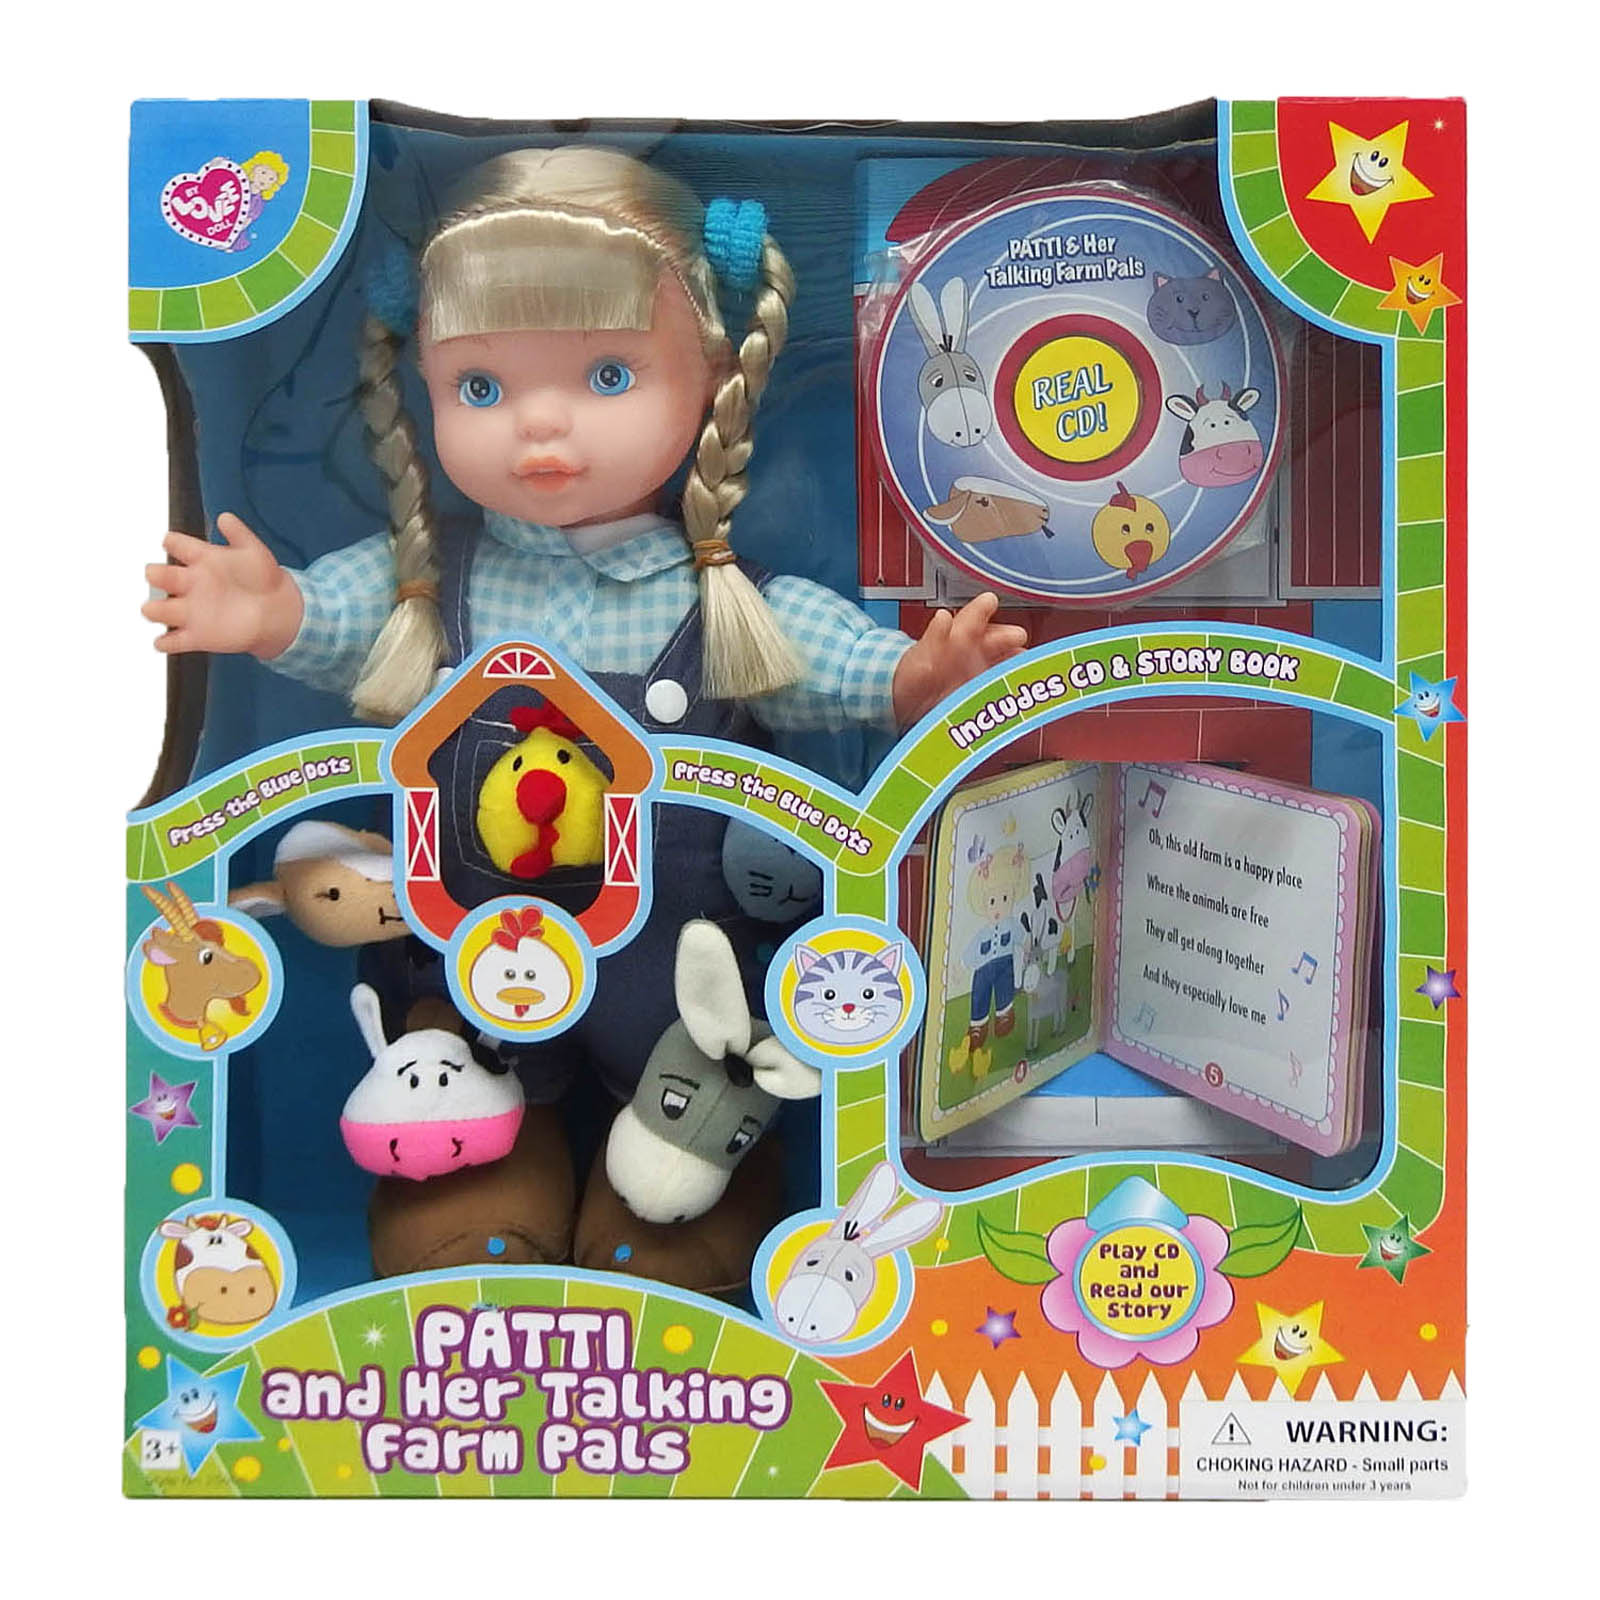 13" Electronic Soft Patti Doll and Talking Farm Pals